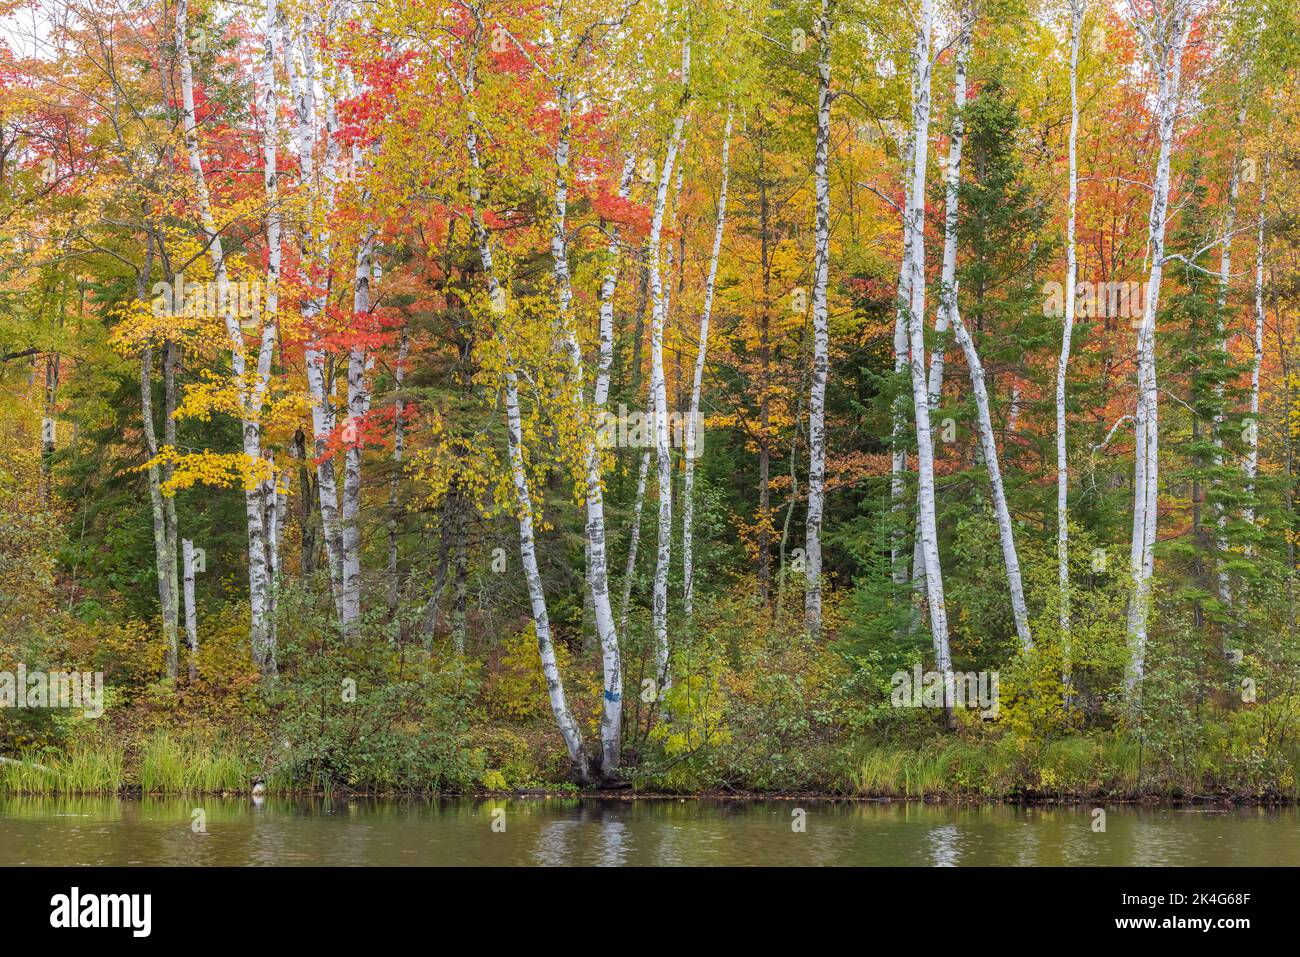 A beautiful autumn scene on the east fork of the Chippewa River in northern Wisconsin. Stock Photo